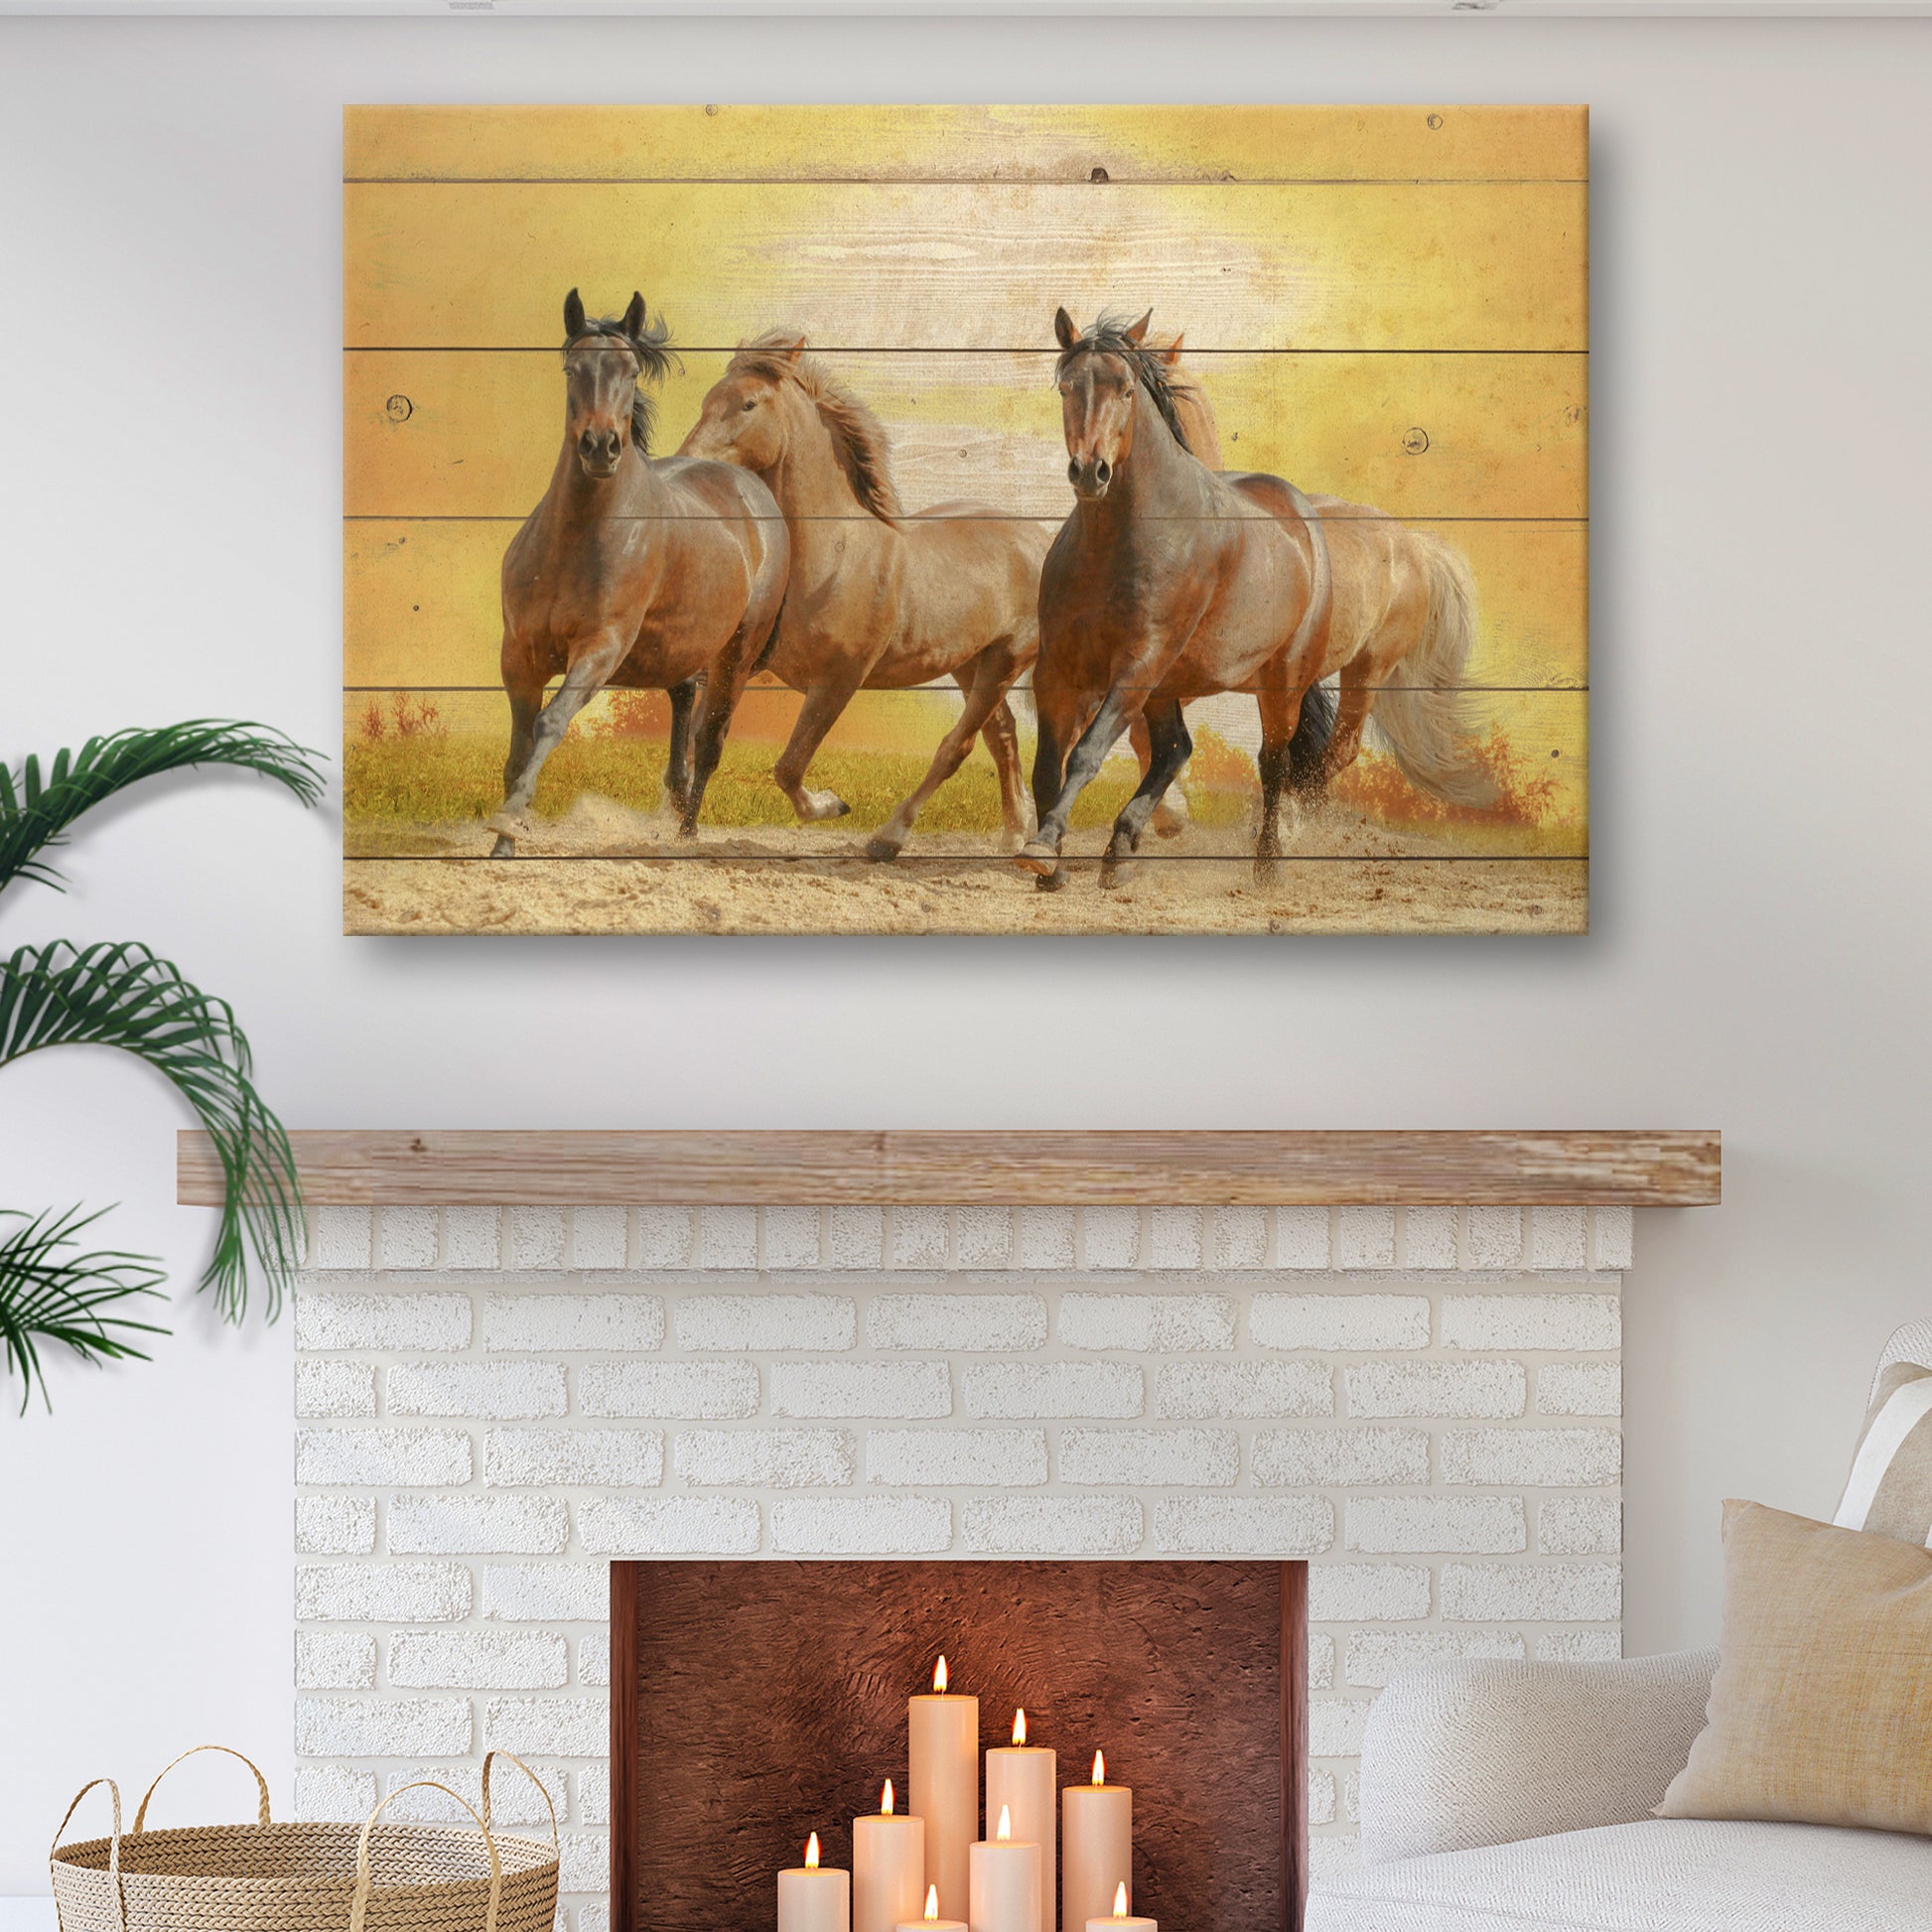 Galloping Wild Horses Canvas Wall Art - Image by Tailored Canvases